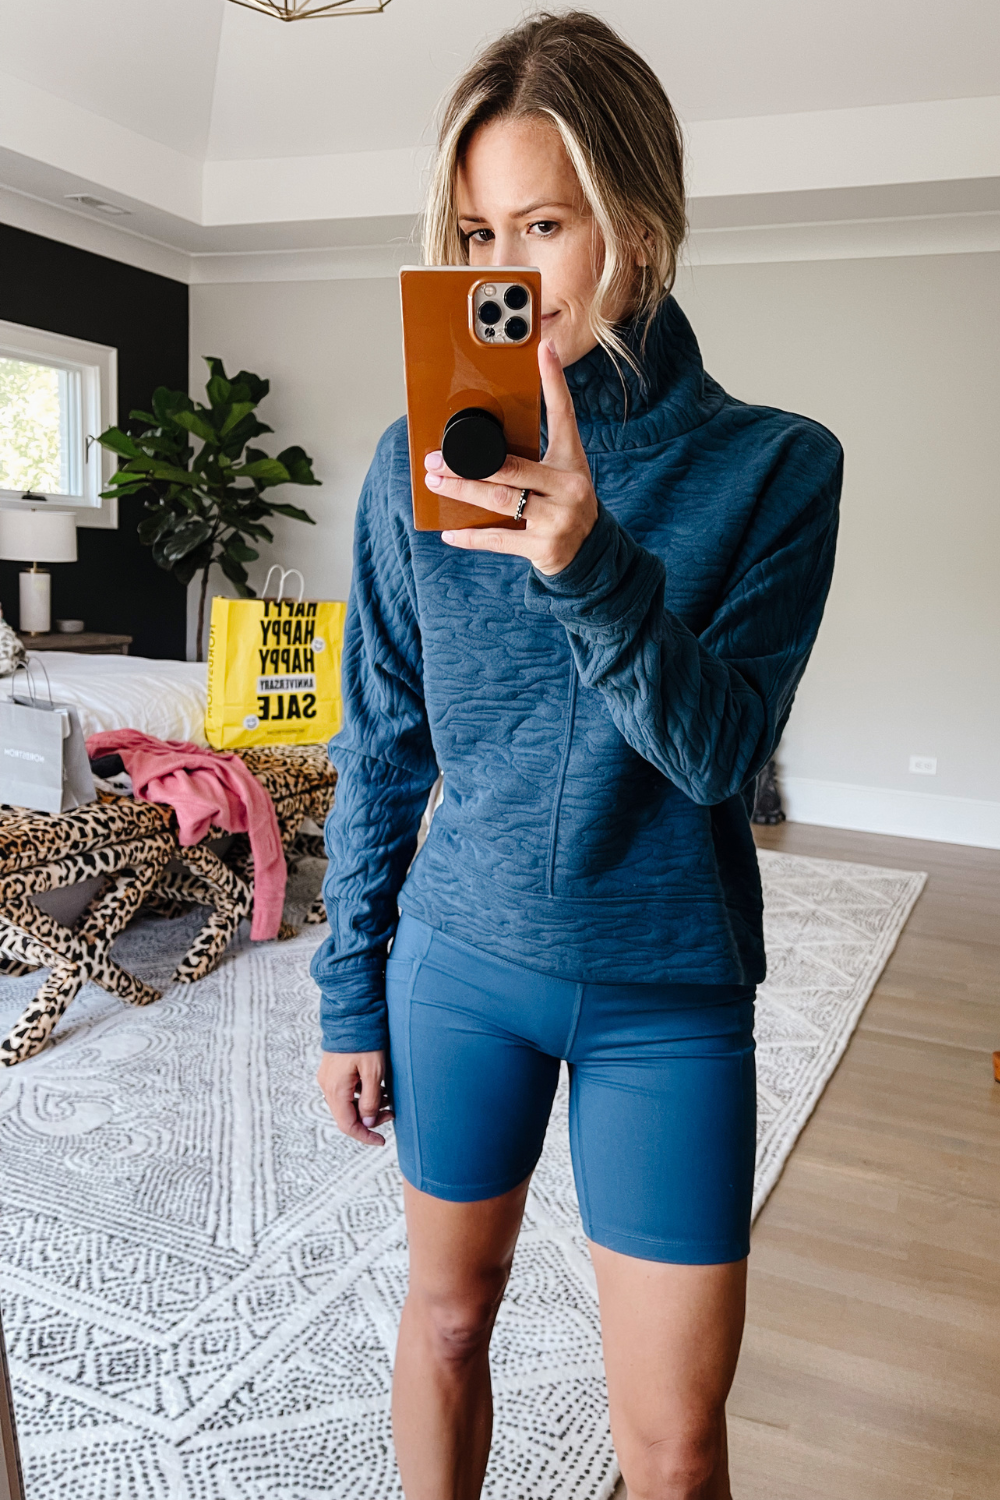 Suzanne wearing a Zella pullover and Zella bike shorts